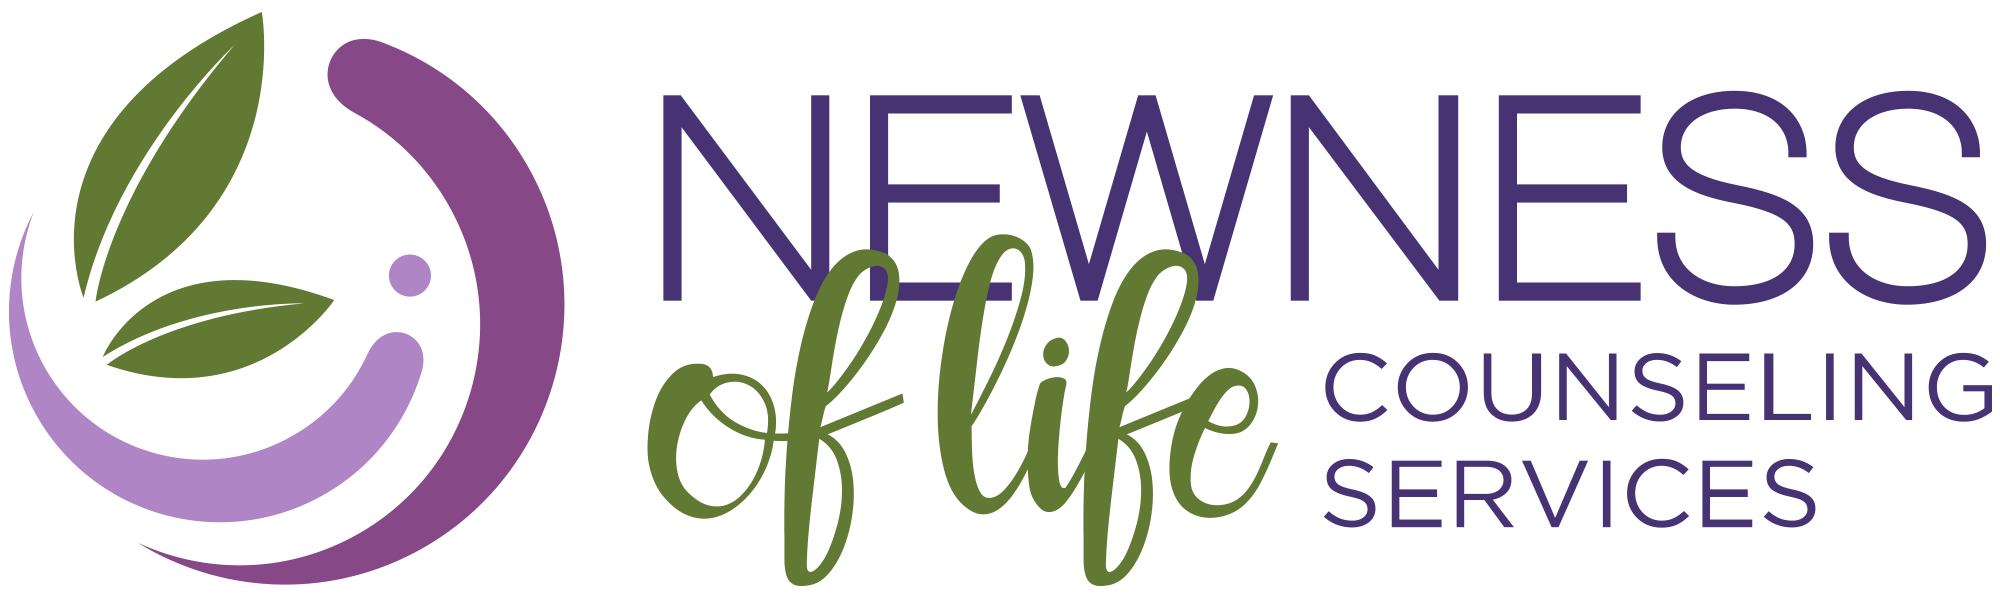 Newness of Life Counseling Services